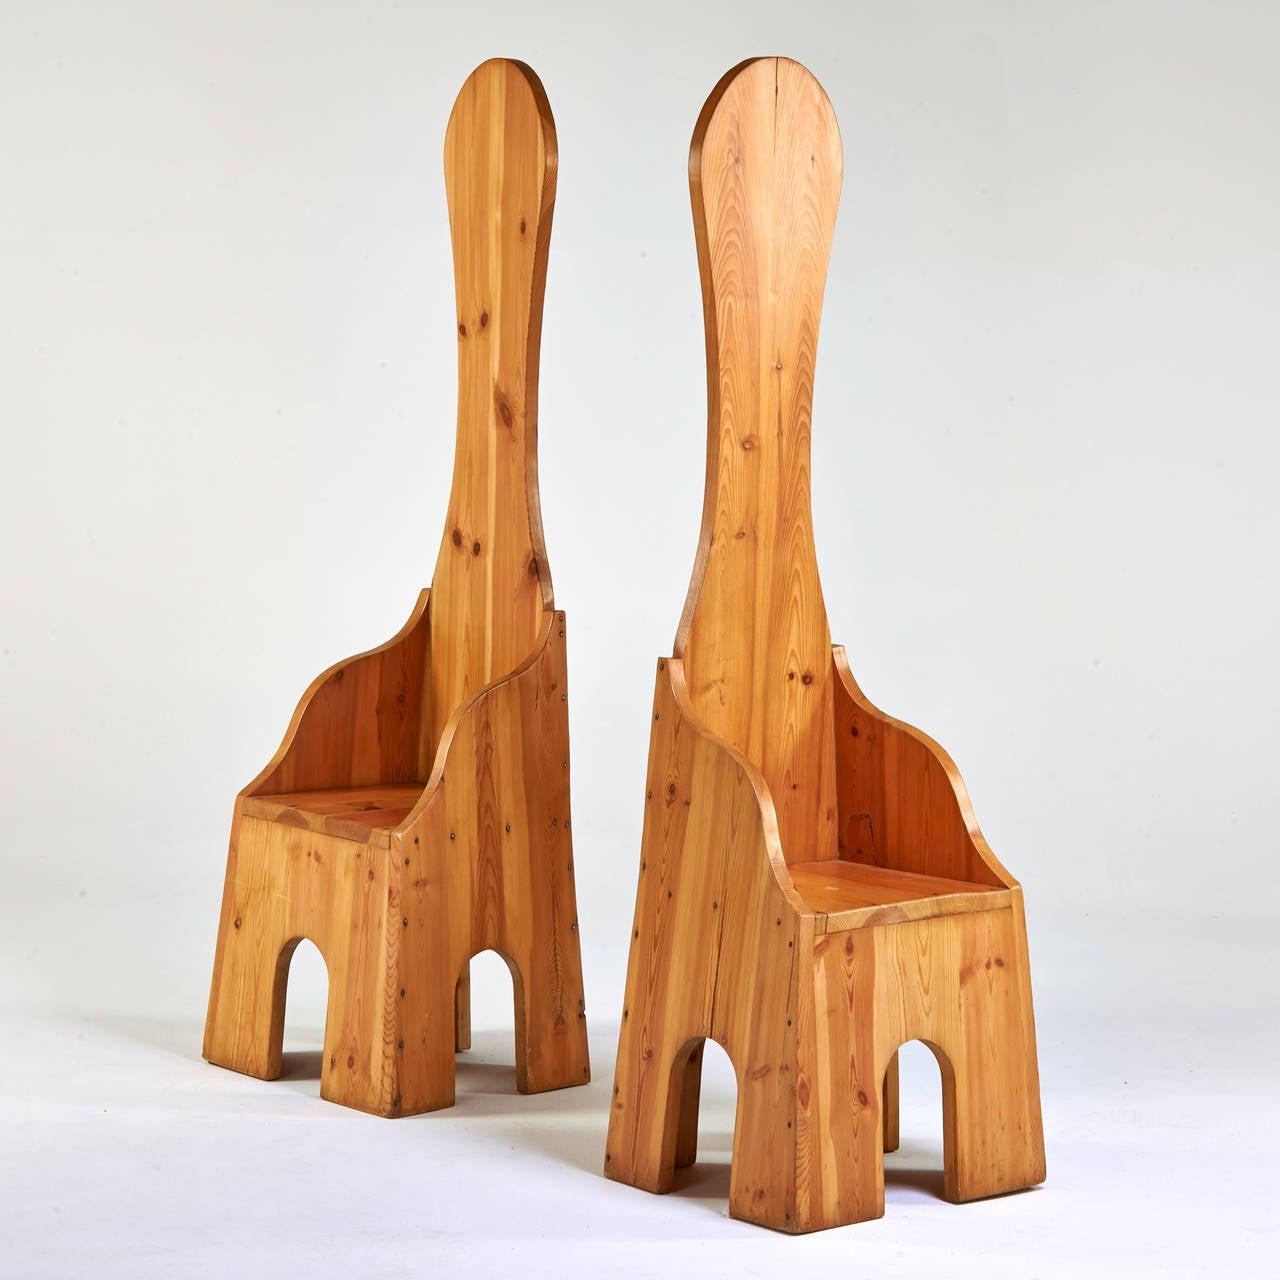 Pair of high back knotty pine chairs in the spirit of Mario Ceroli, Italy c. 1970.